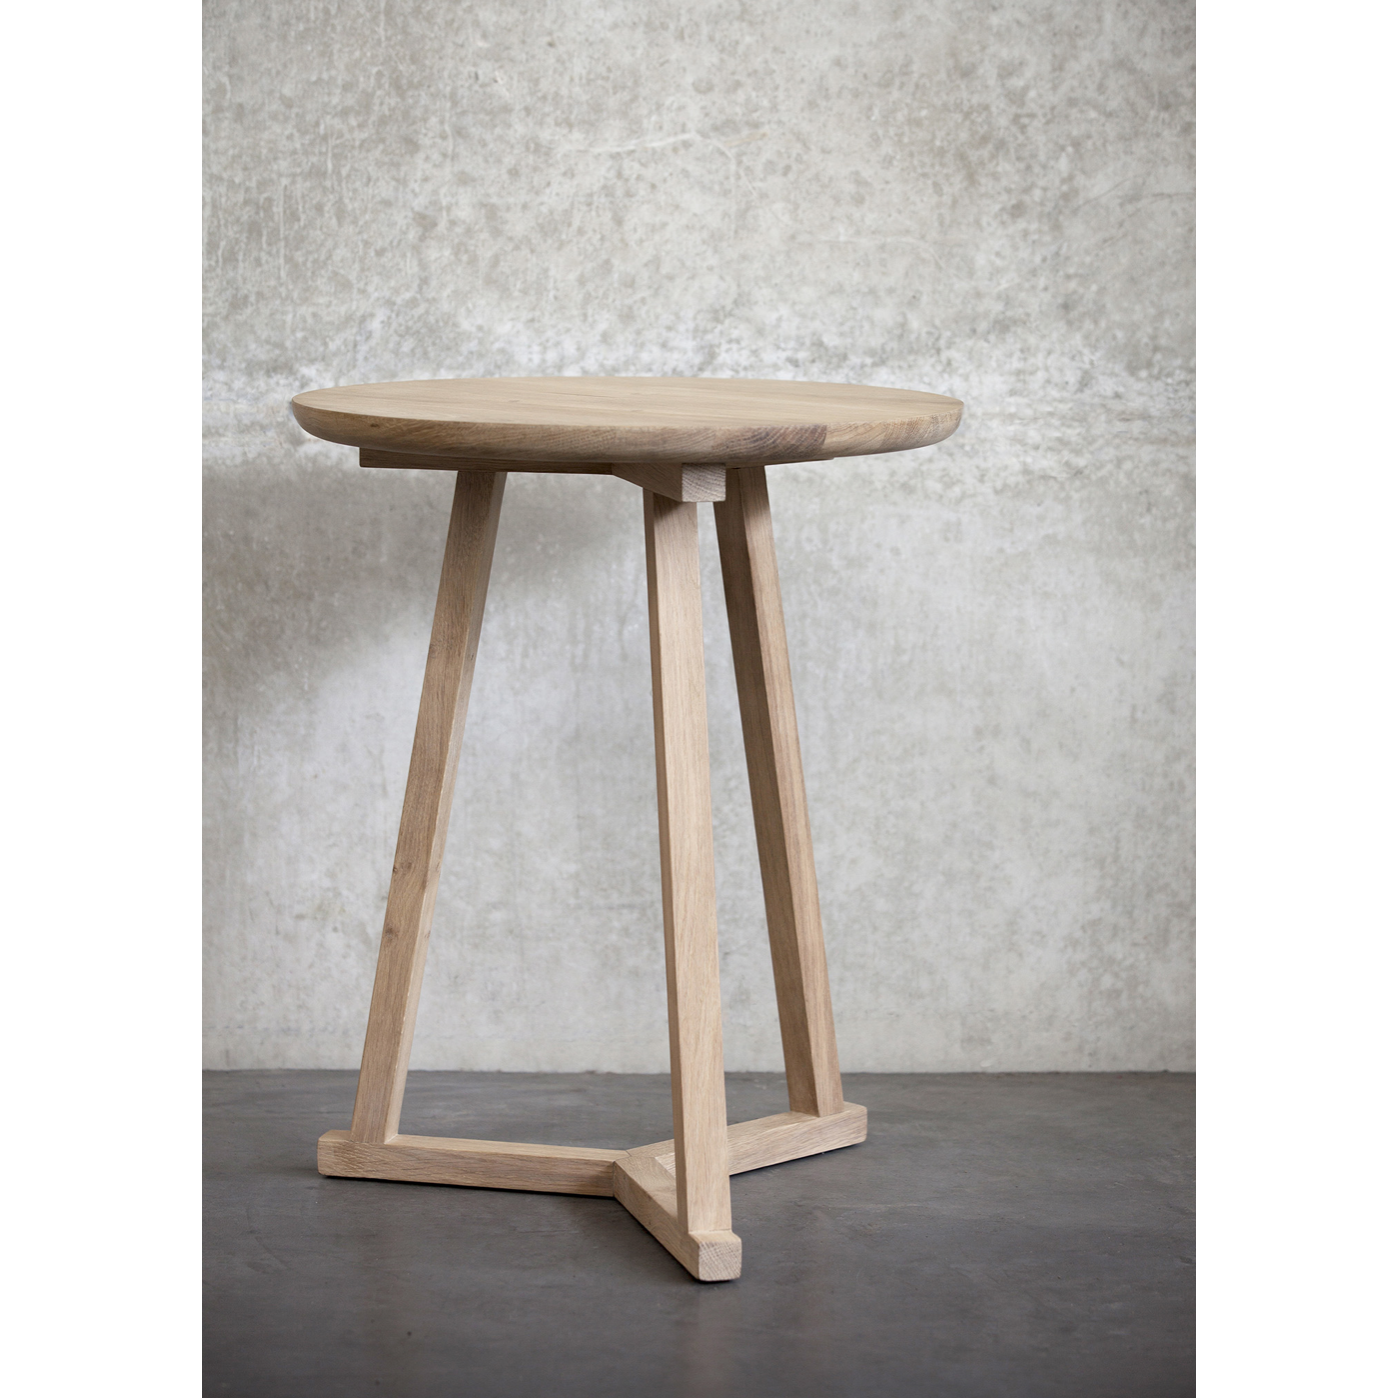 The Oak Tripod Side Table is a light, versatile piece that can be used on its own or in a group of several tables. It can easily be moved from room to room, placed next to a chair or a settee, or as a bedside table.  Dimensions: 18.5"w x 18.5"d x 22.5"h  Weight: 11 lbs  Material: Oak, 100% solid wood Finish: Varnished